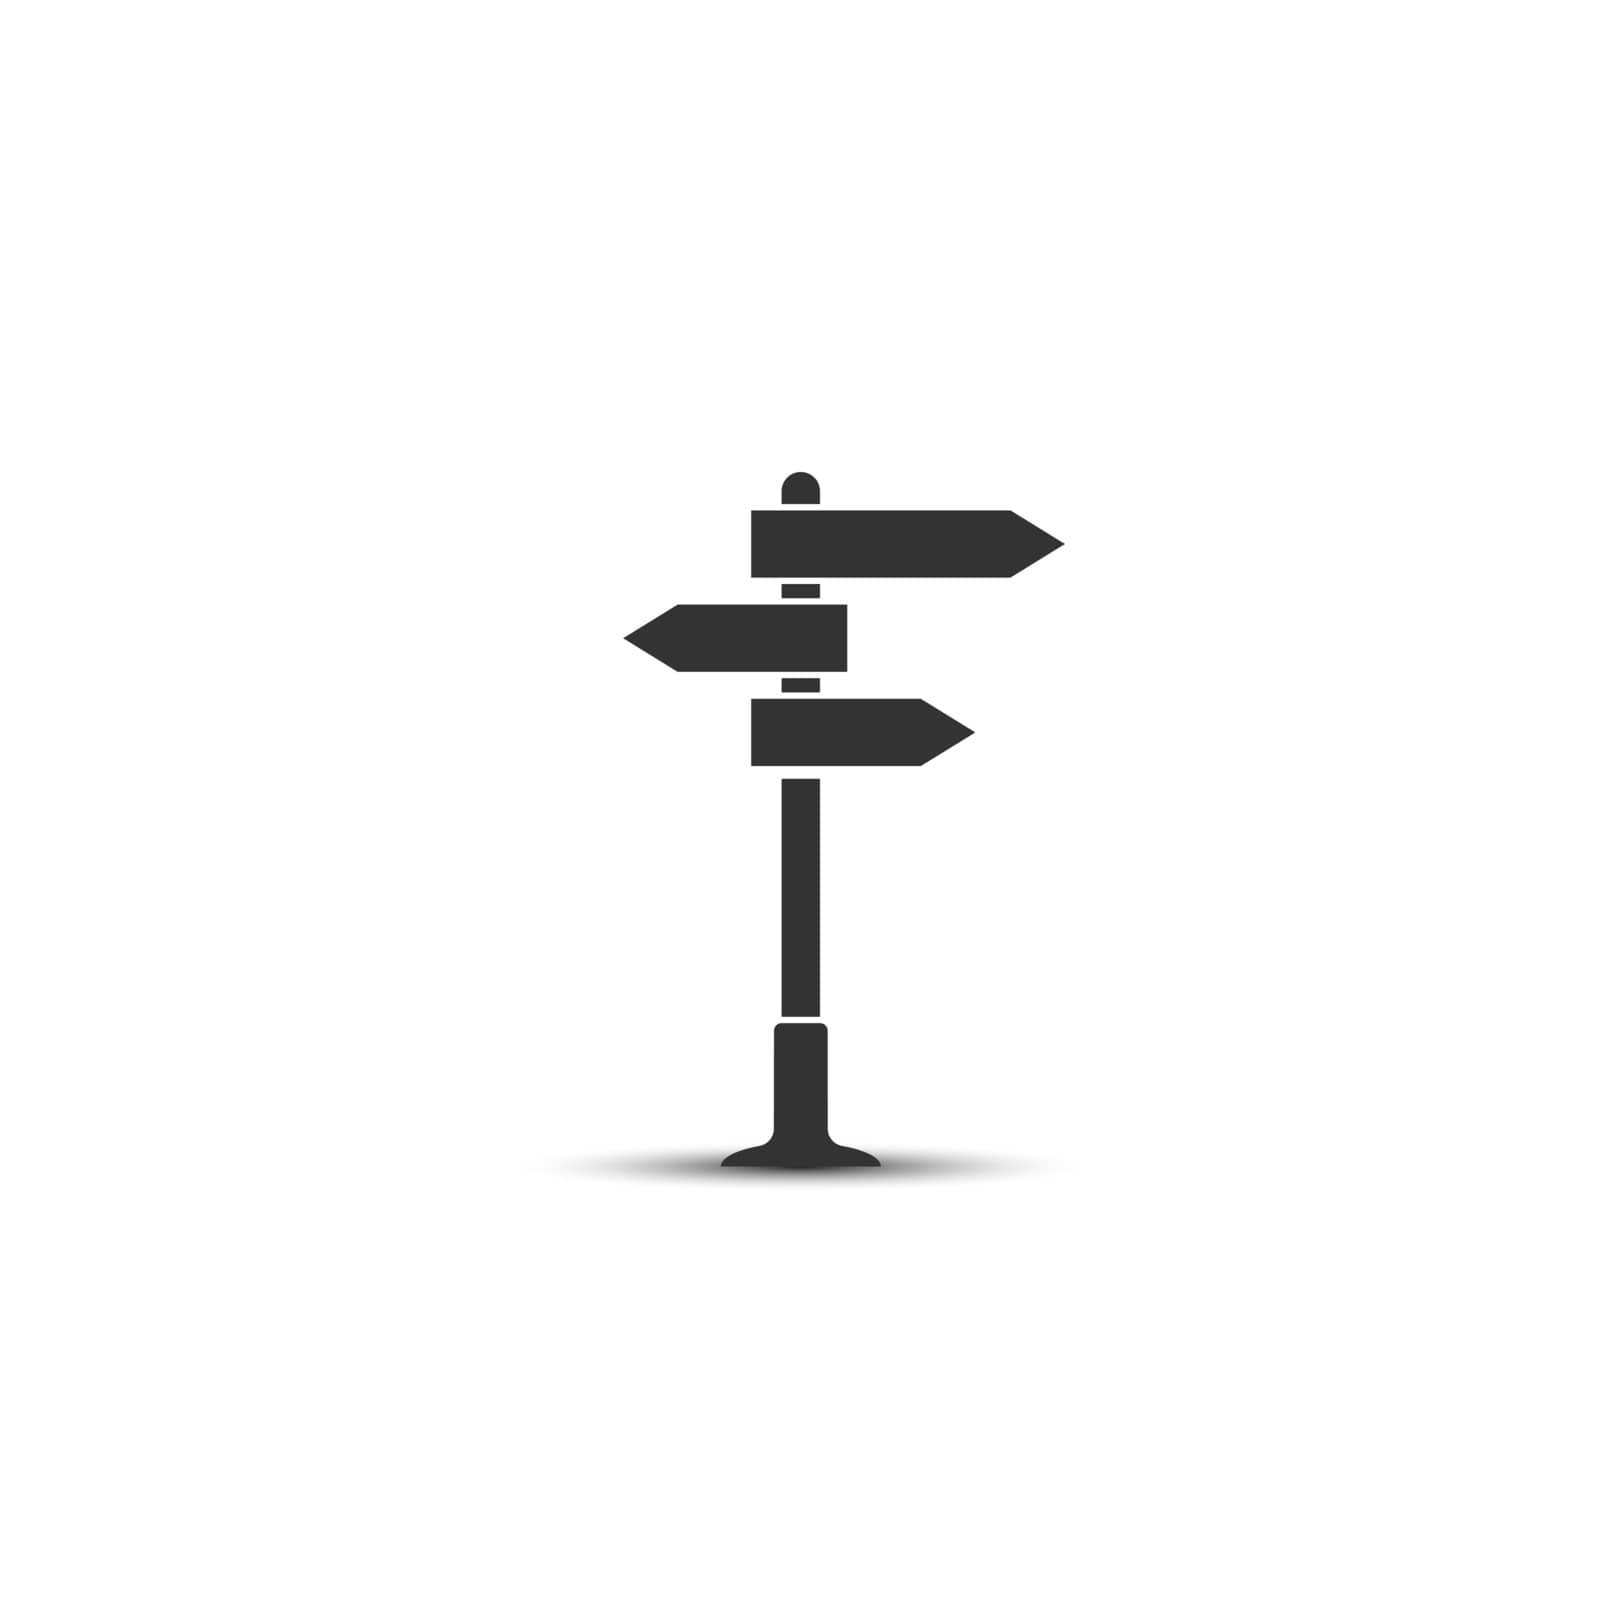 Direction indicator icon with two placemarks. Vector illustratio by Grommik